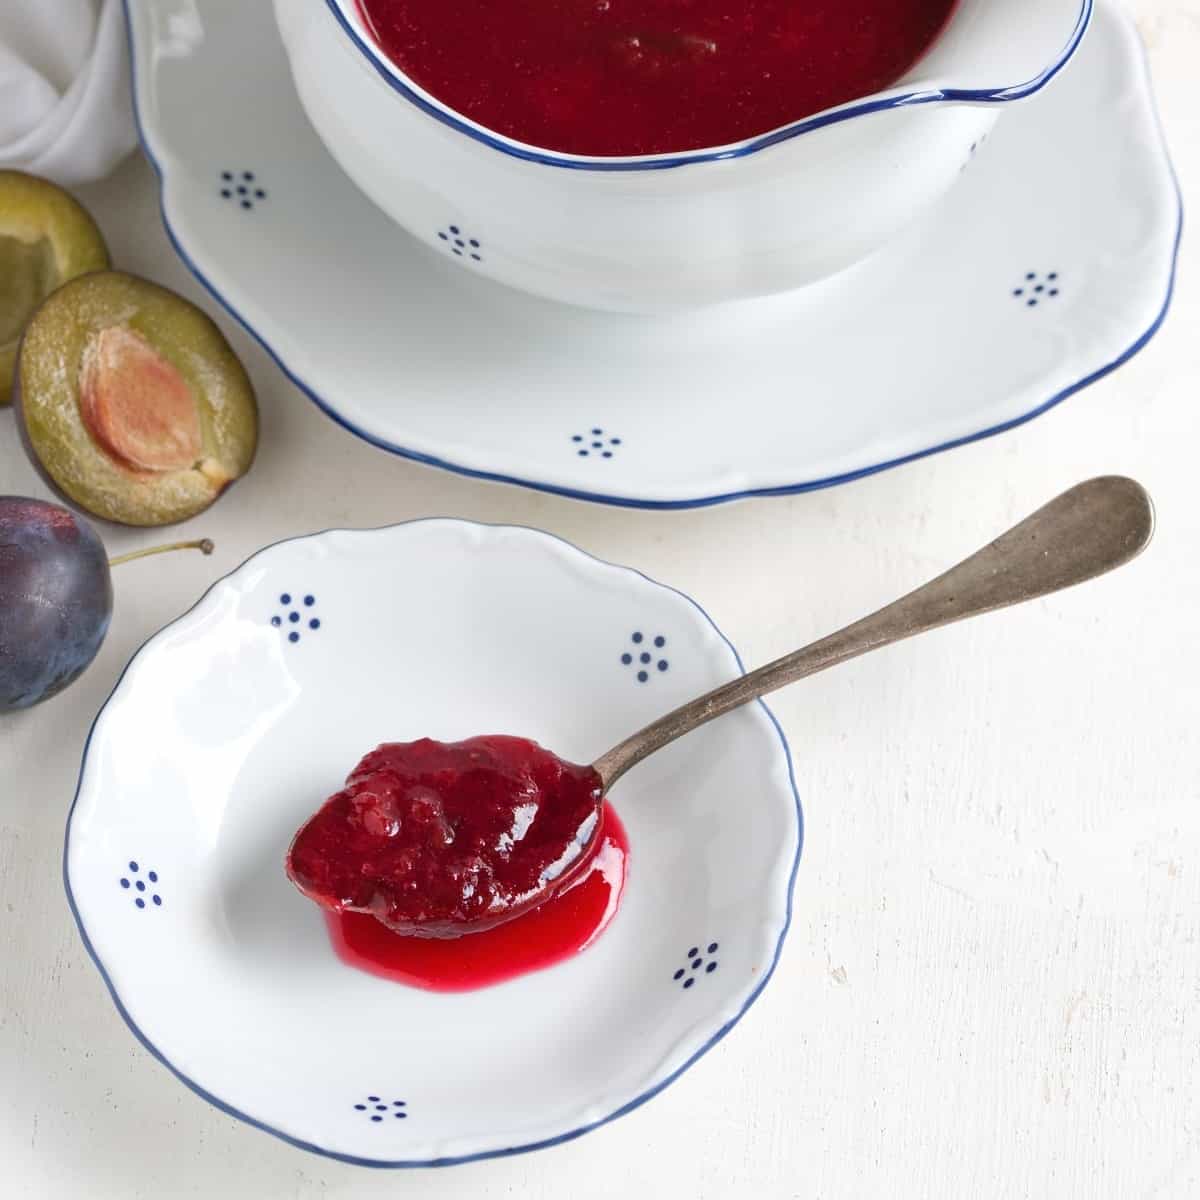 A spoon of plum compote on a small plate.